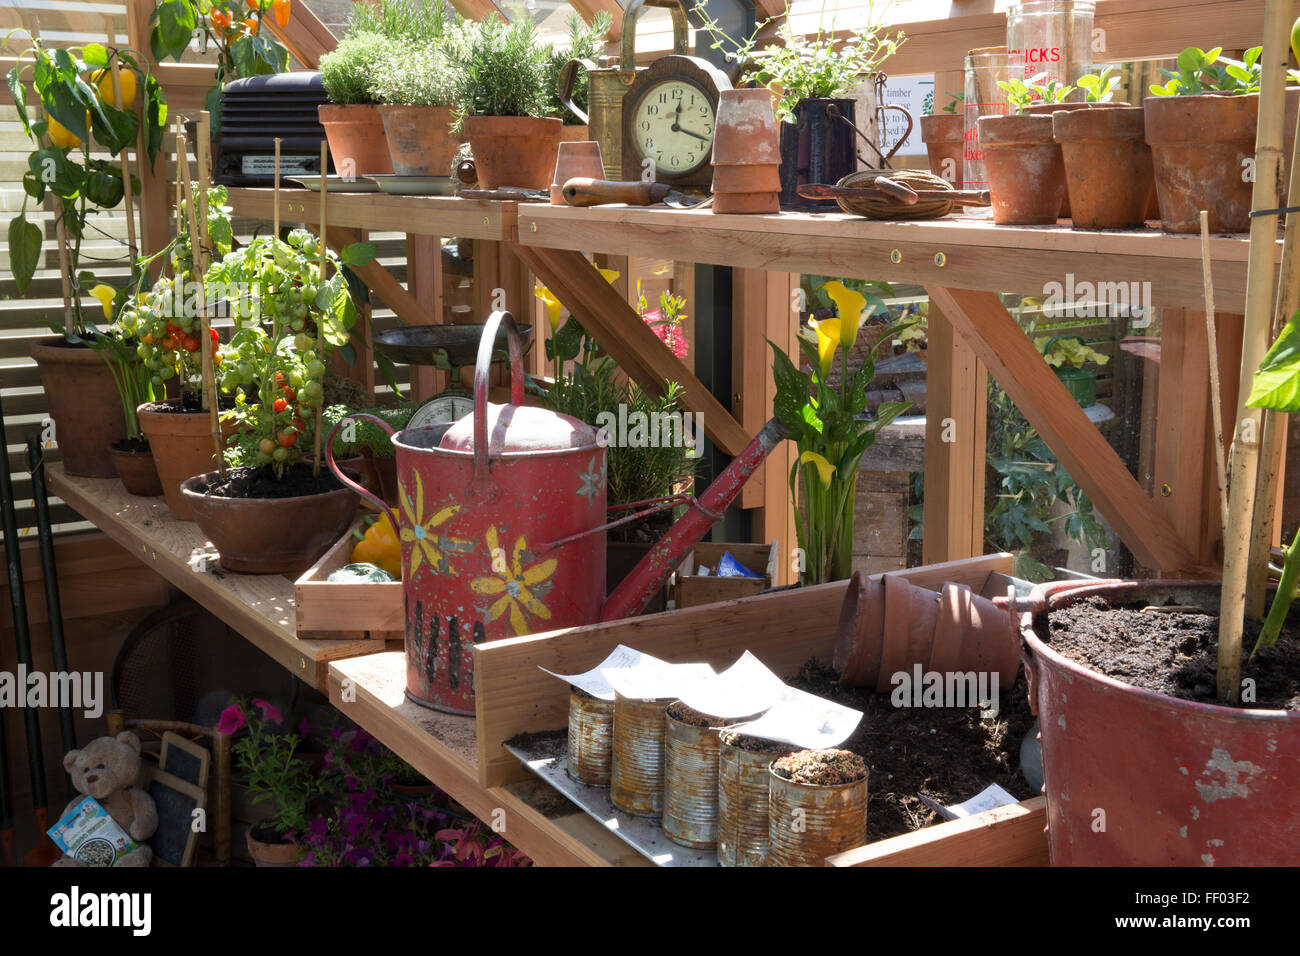 potting greenhouse with tomato and pepper plants growing in terracotta plant pots gardening without plastic Chelsea flower show 2015 London UK Stock Photo